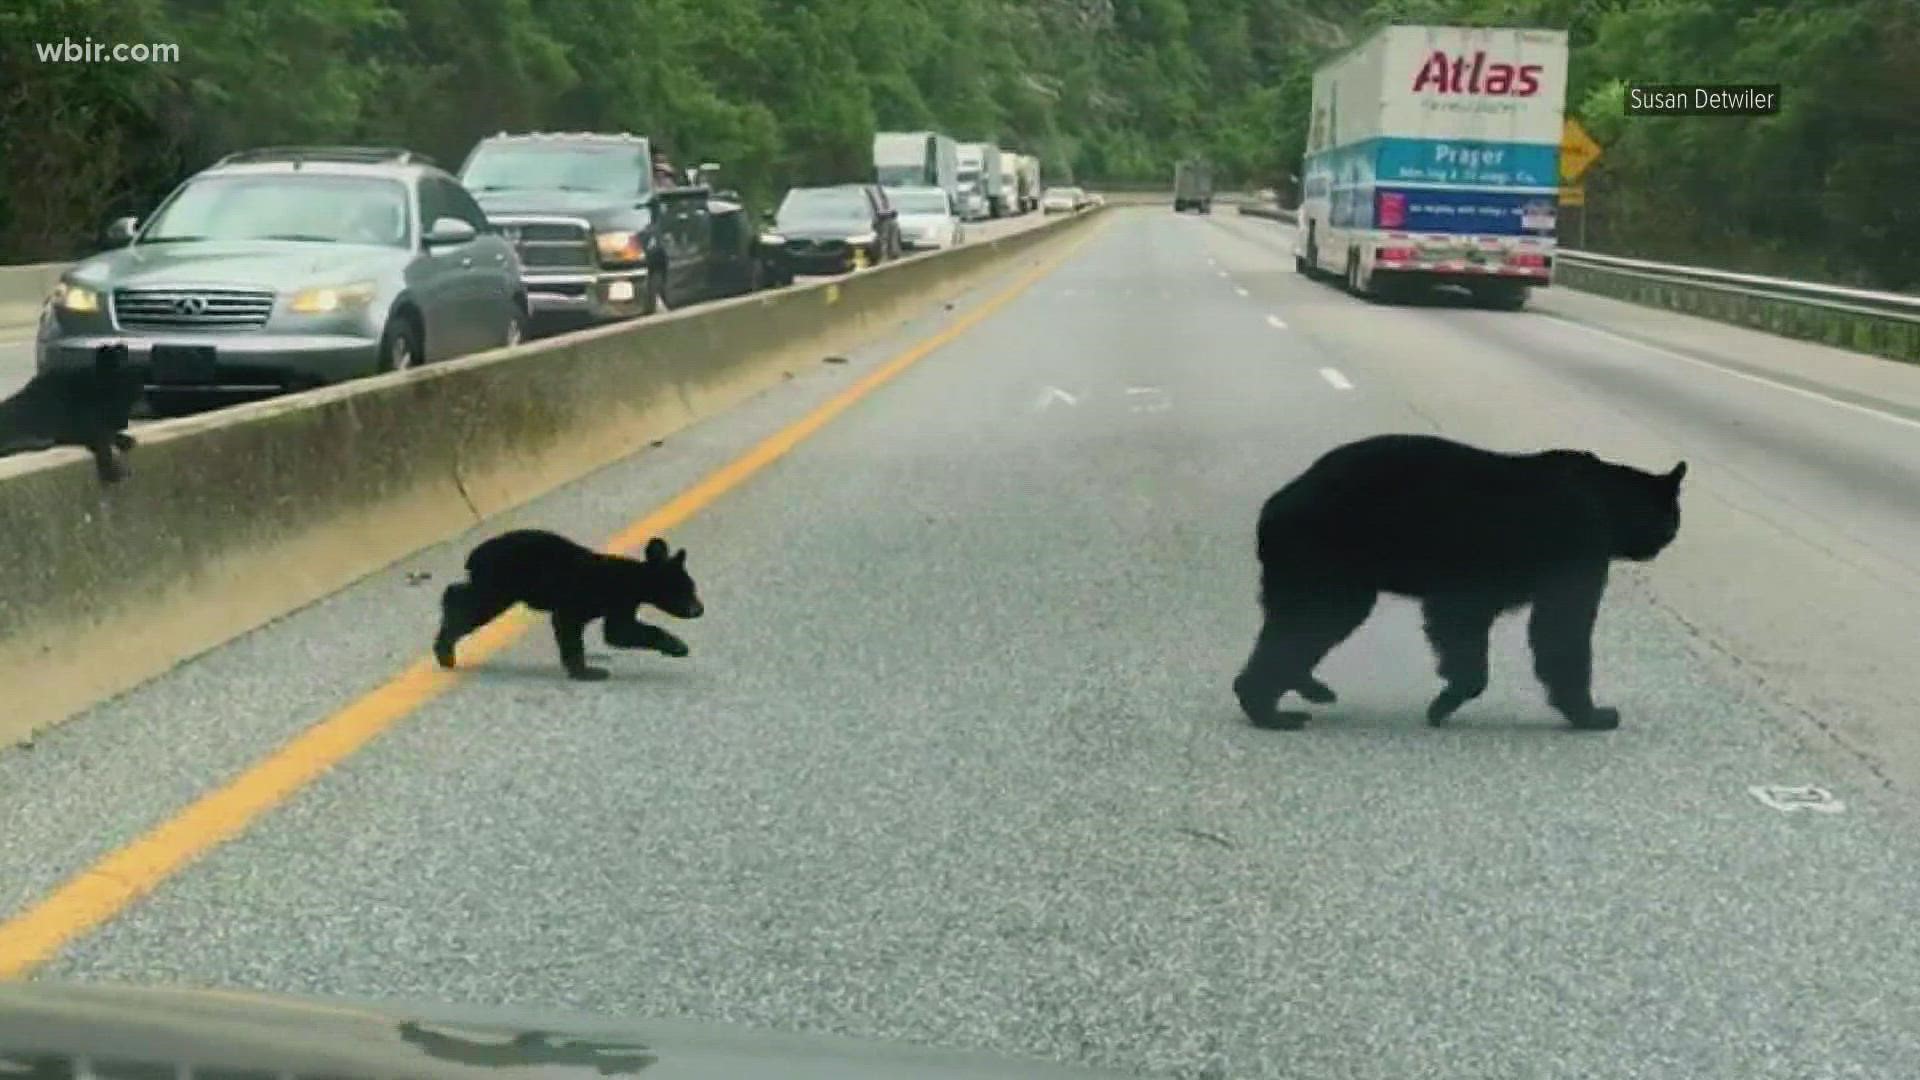 Just over the state line in NC on a stretch of I-40 through the Pigeon River Gorge, cars have hit and killed at least 9 bears in the last 3 months.